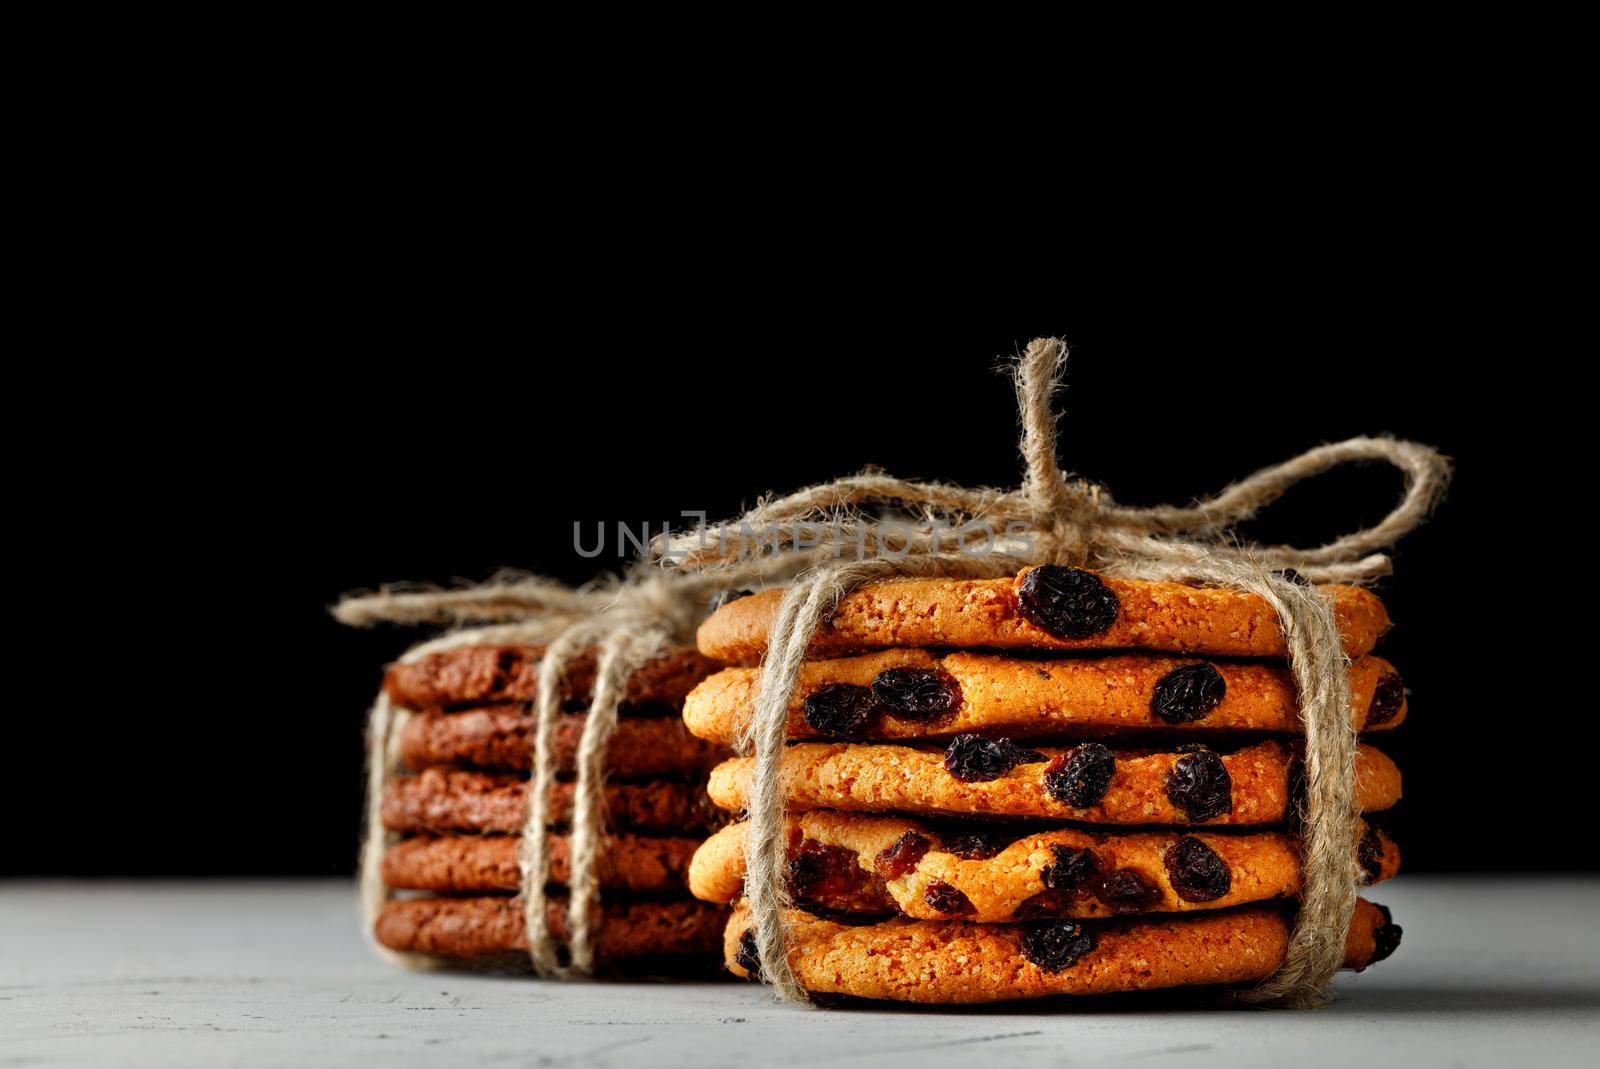 Stacks of homemade raisin oatmeal cookies and dark chocolate biscuits tied with rope against a black background. Copy space. Close-up. Selective focus.